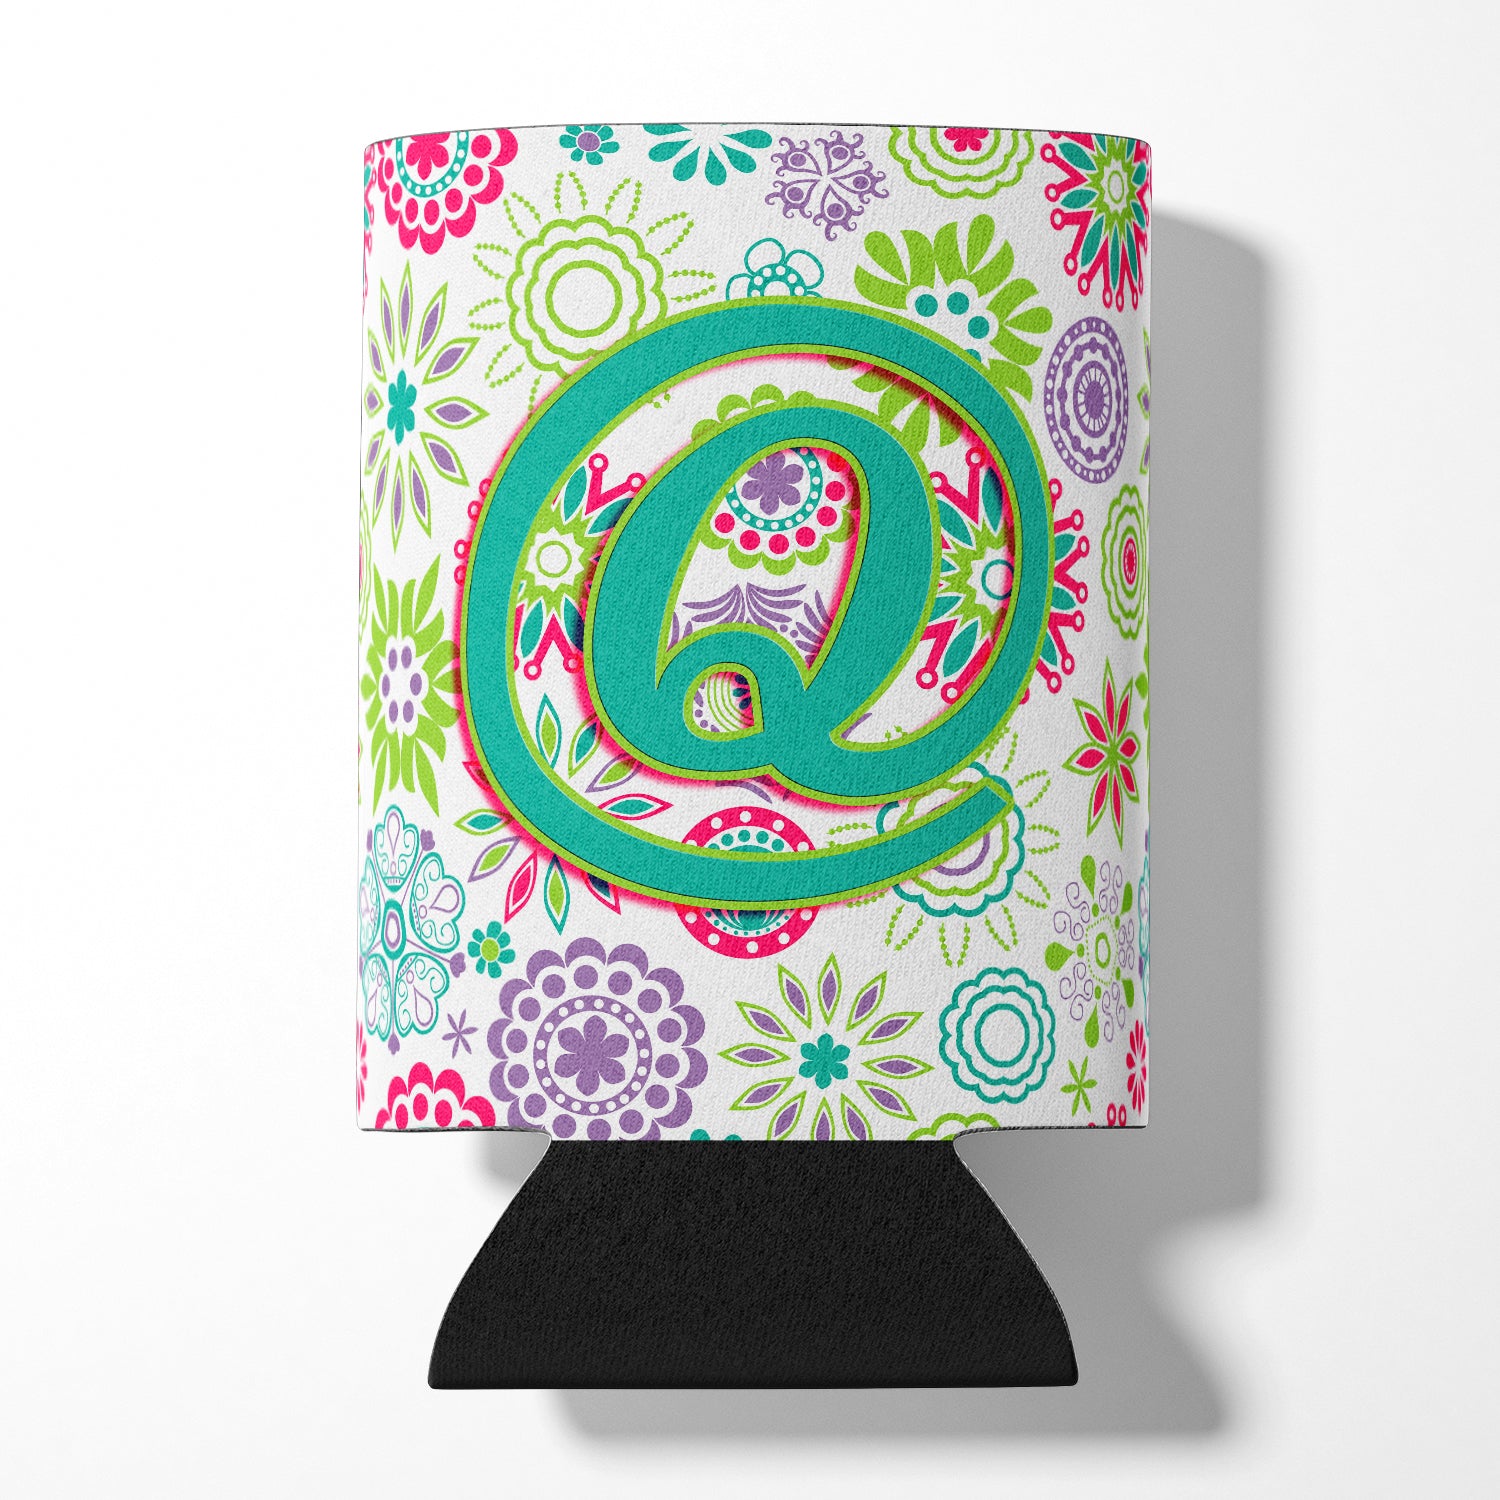 Letter Q Flowers Pink Teal Green Initial Can or Bottle Hugger CJ2011-QCC.